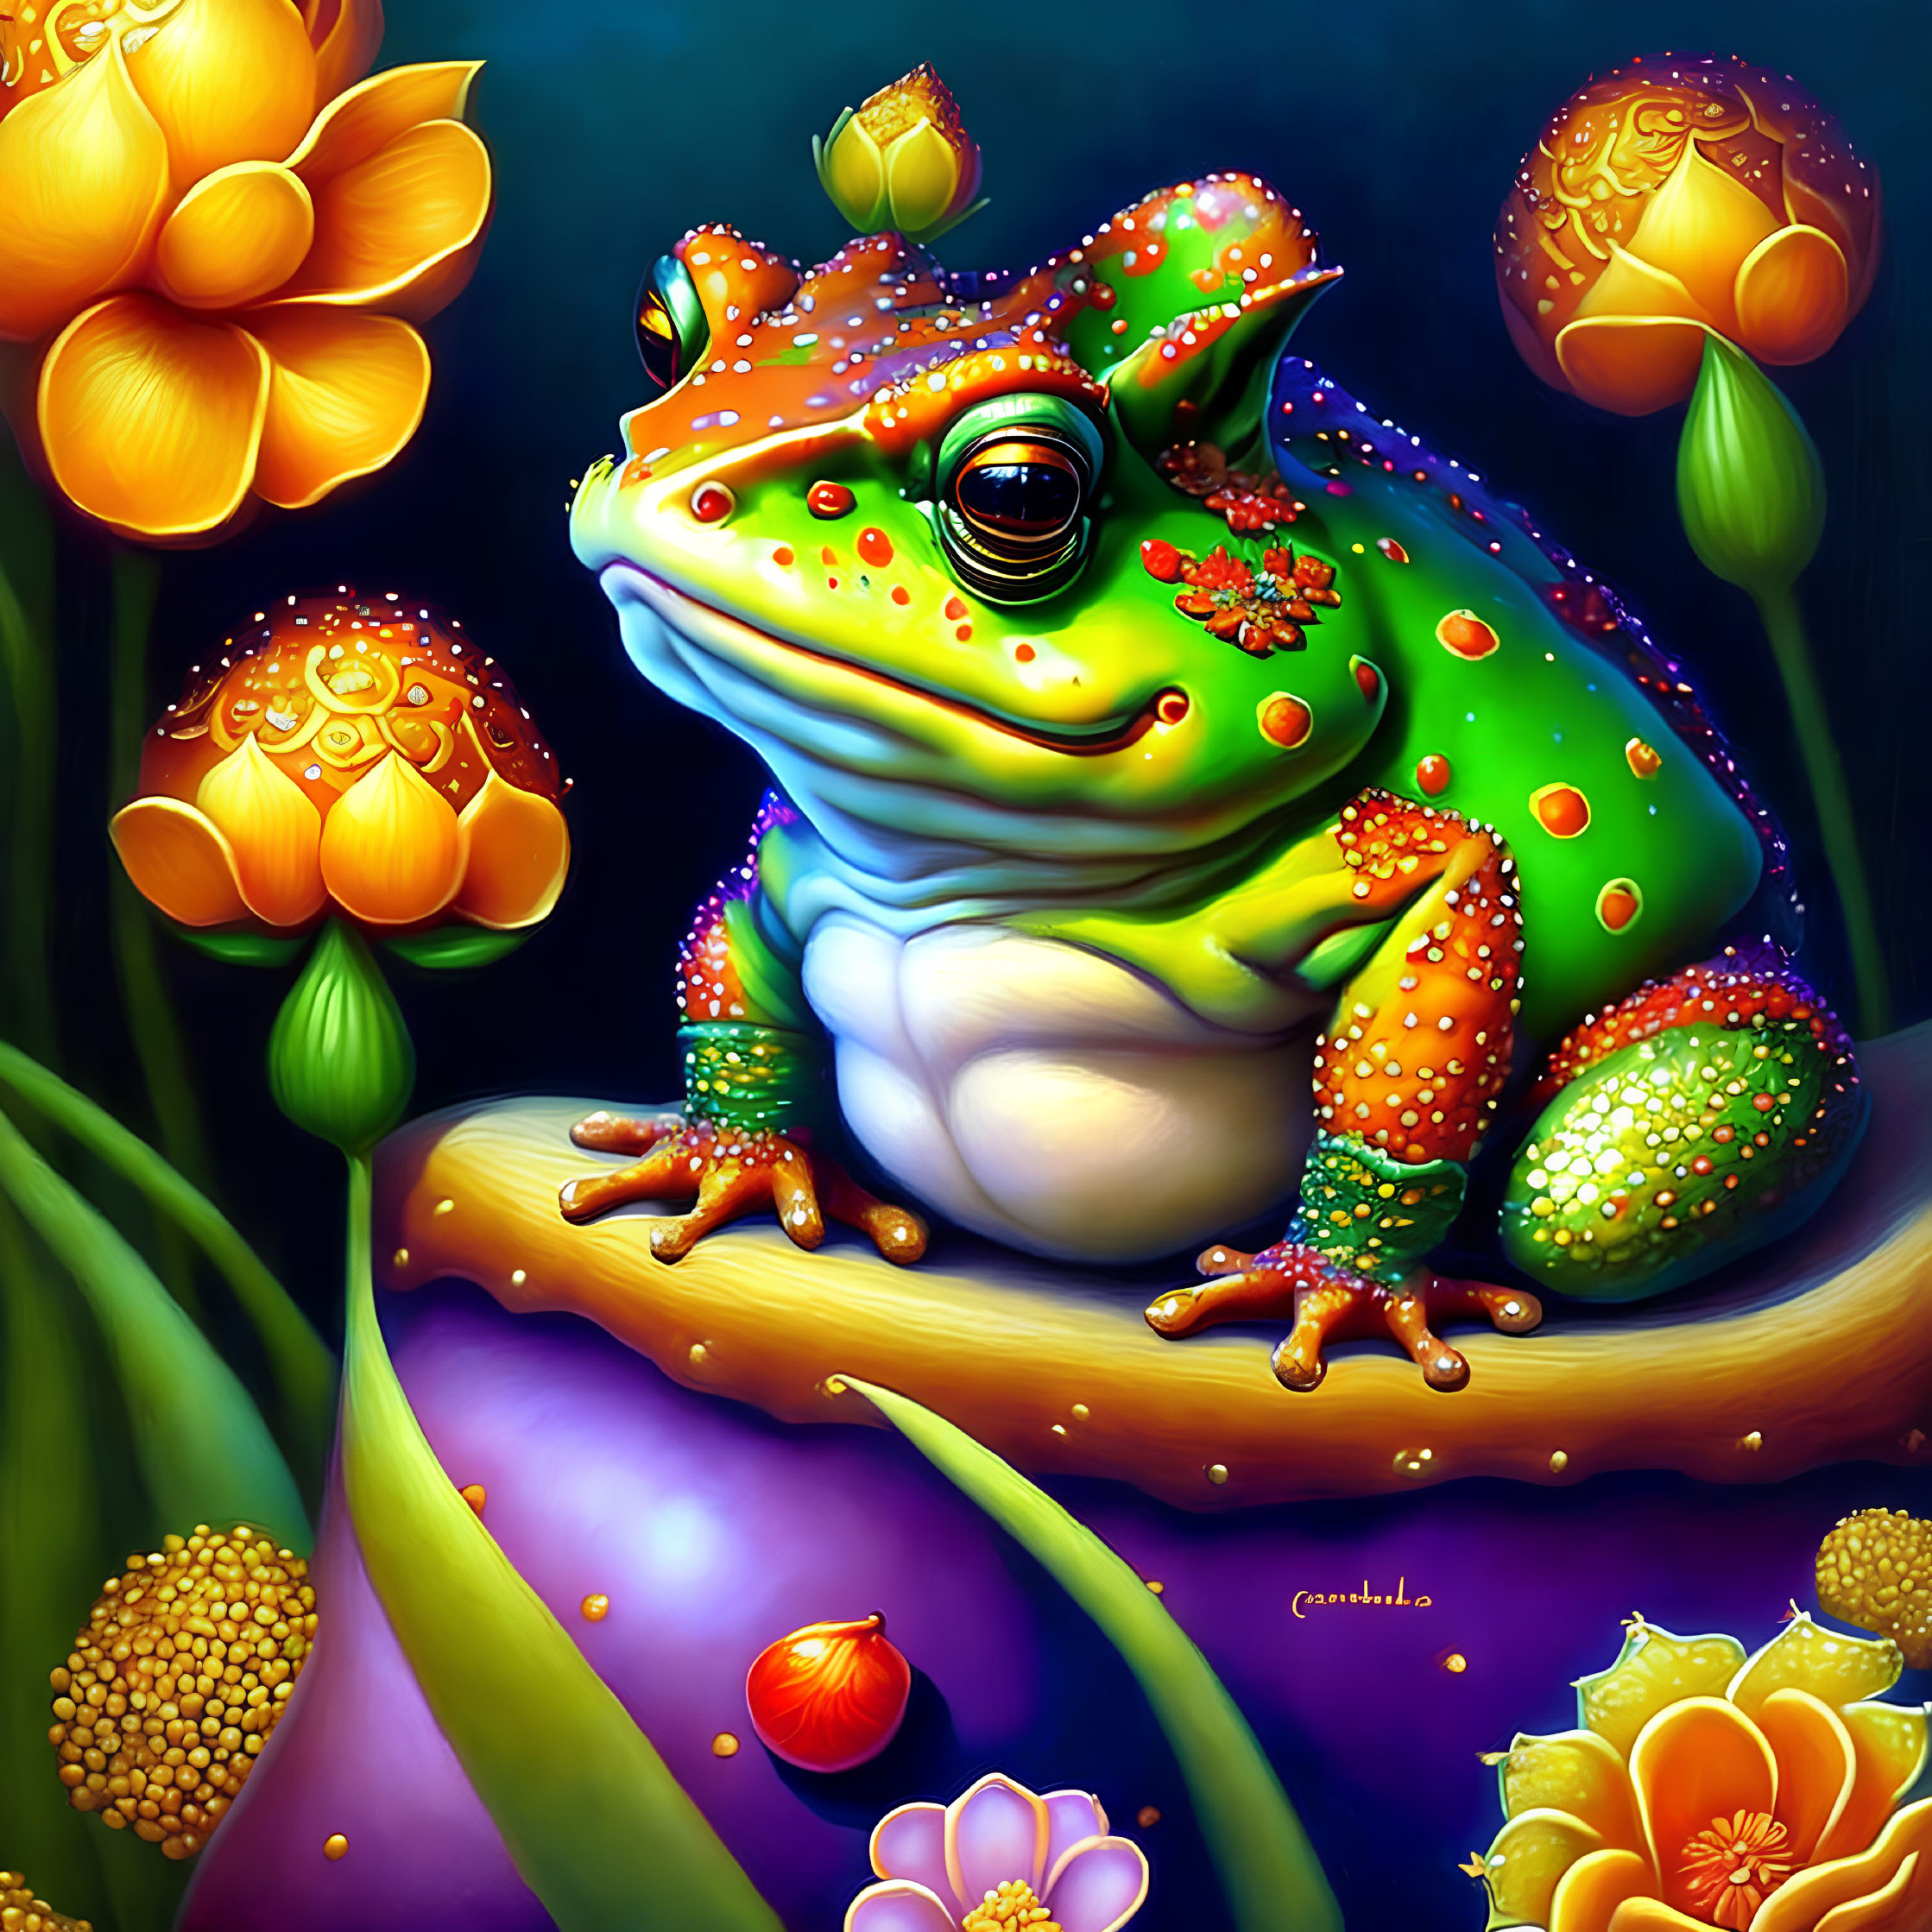 Colorful Frog on Leaf Surrounded by Luminous Flowers